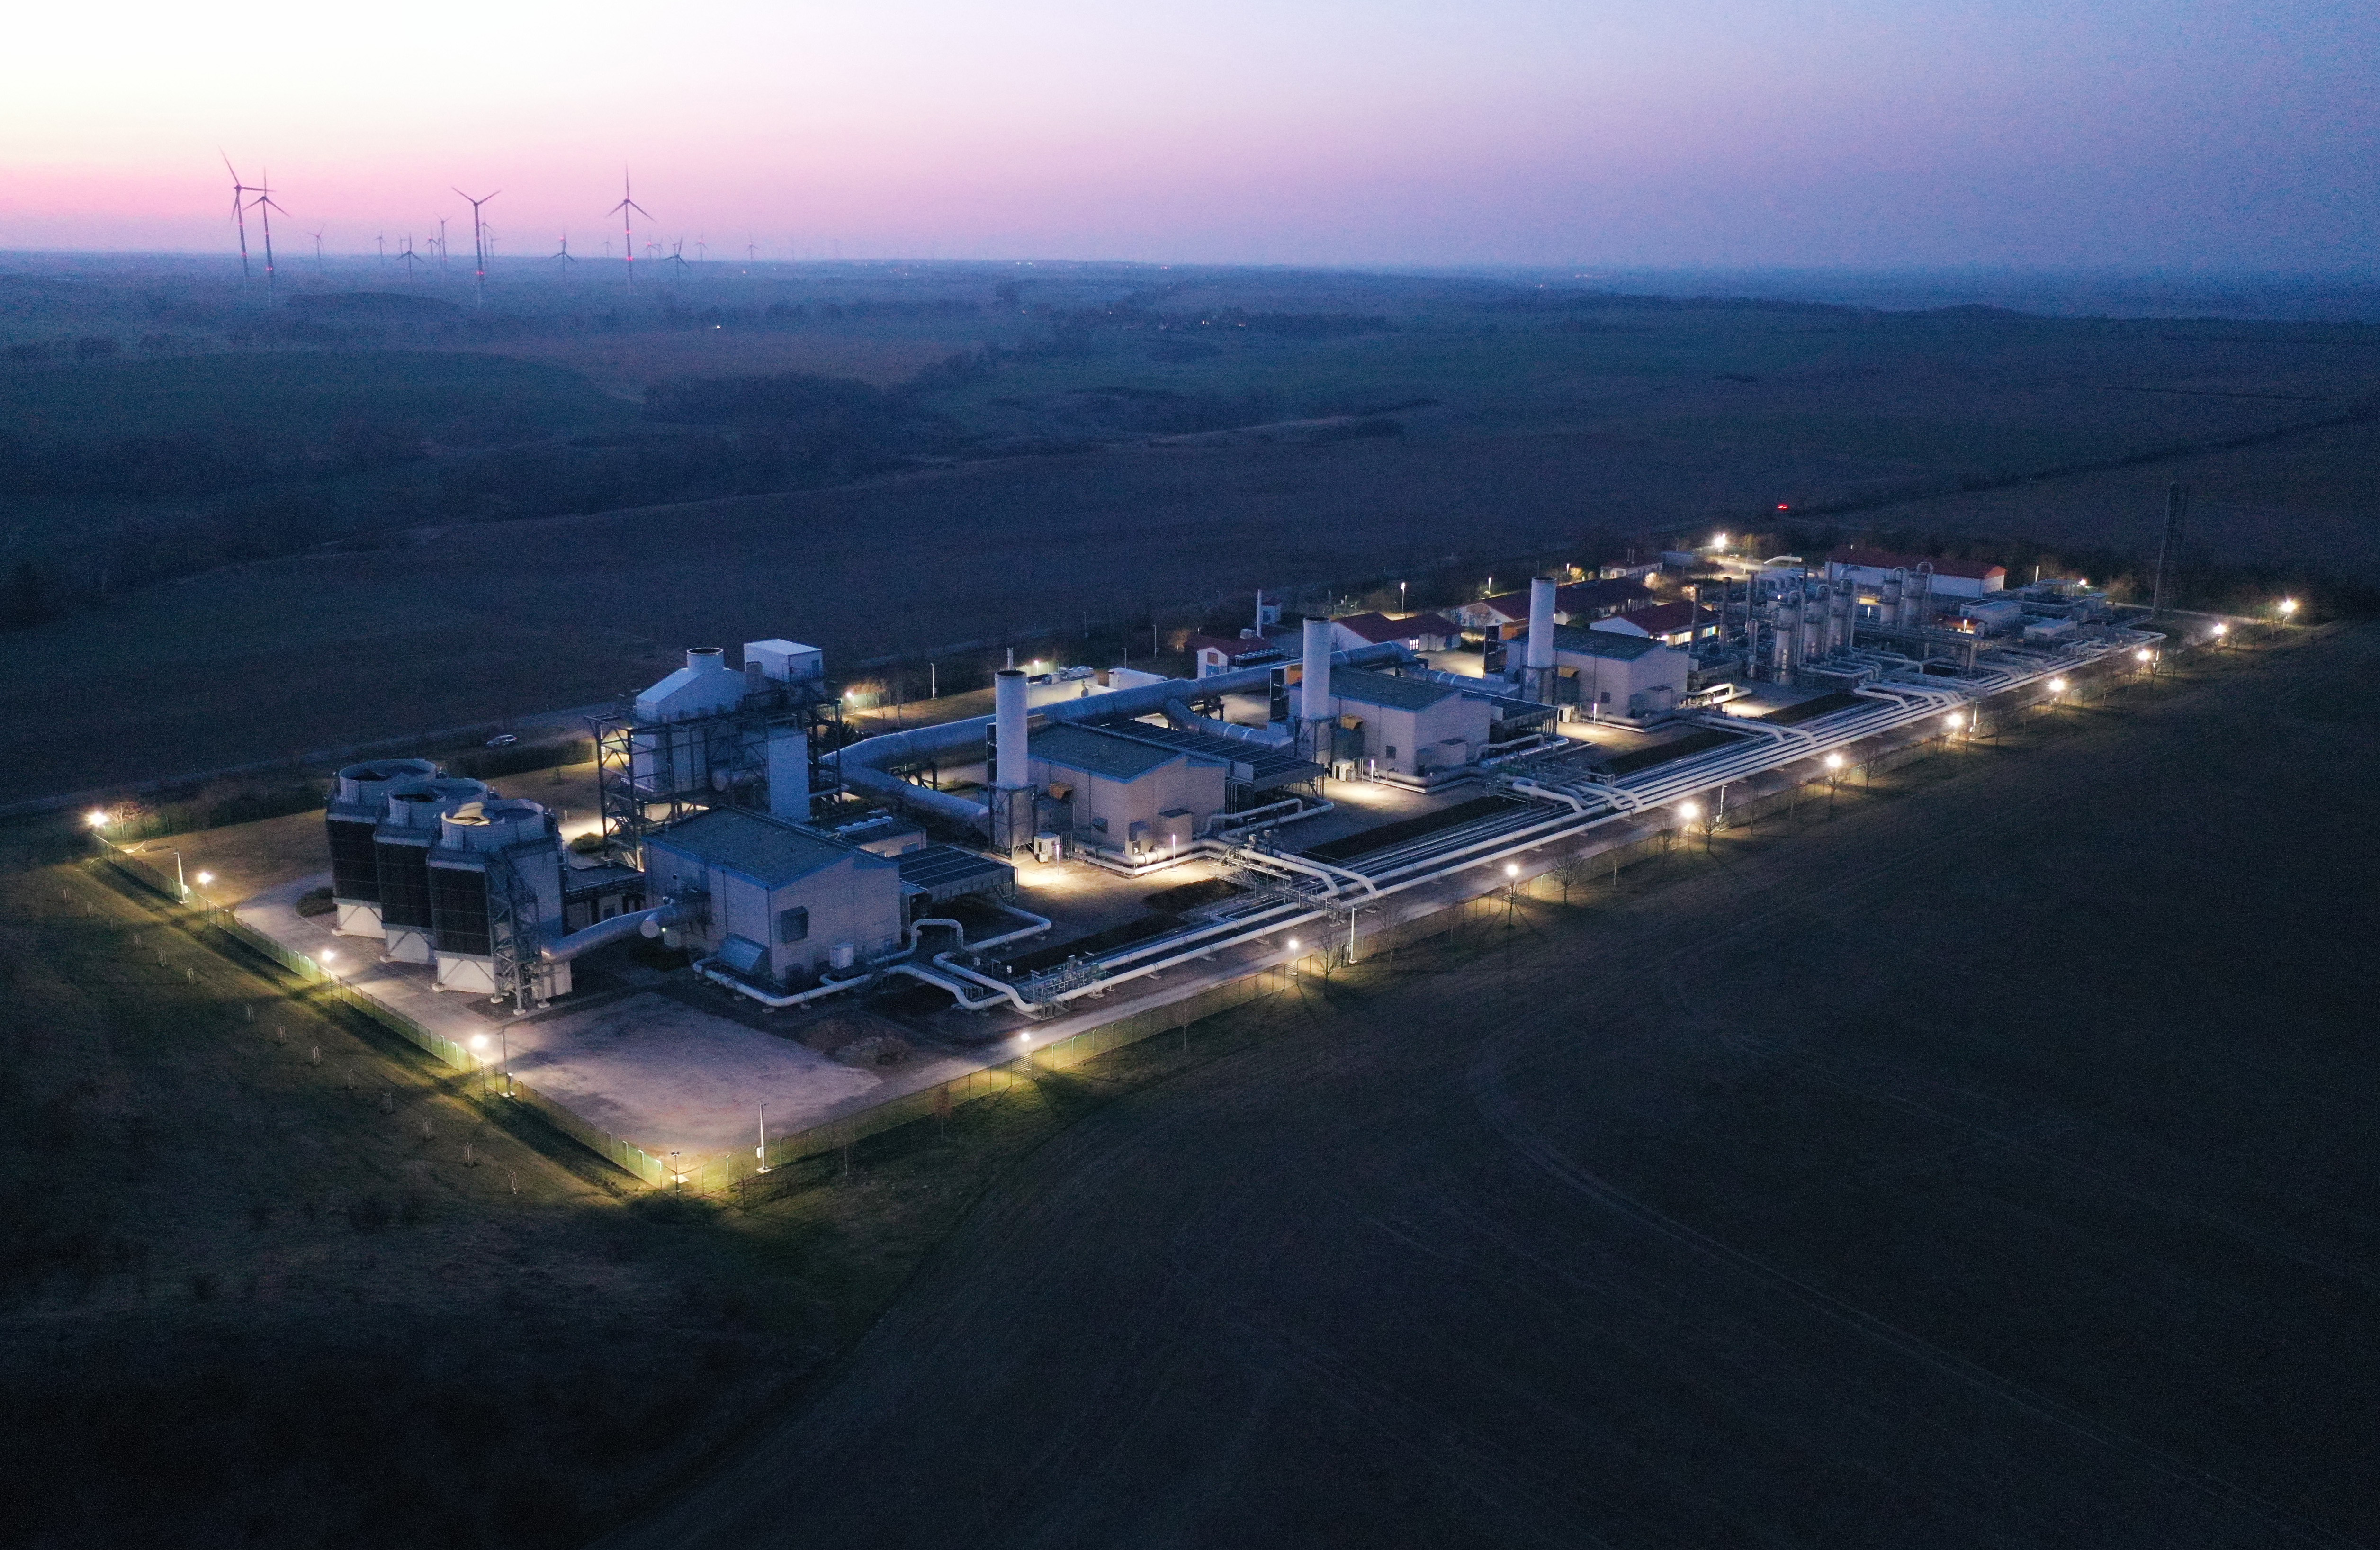 An aerial view of a compressor station of the Jagal natural gas pipeline on March 24, near Mallnow, Germany. The Jagal is the German extension of the Yamal-Europe pipeline that transports Russian natural gas to Germany. 